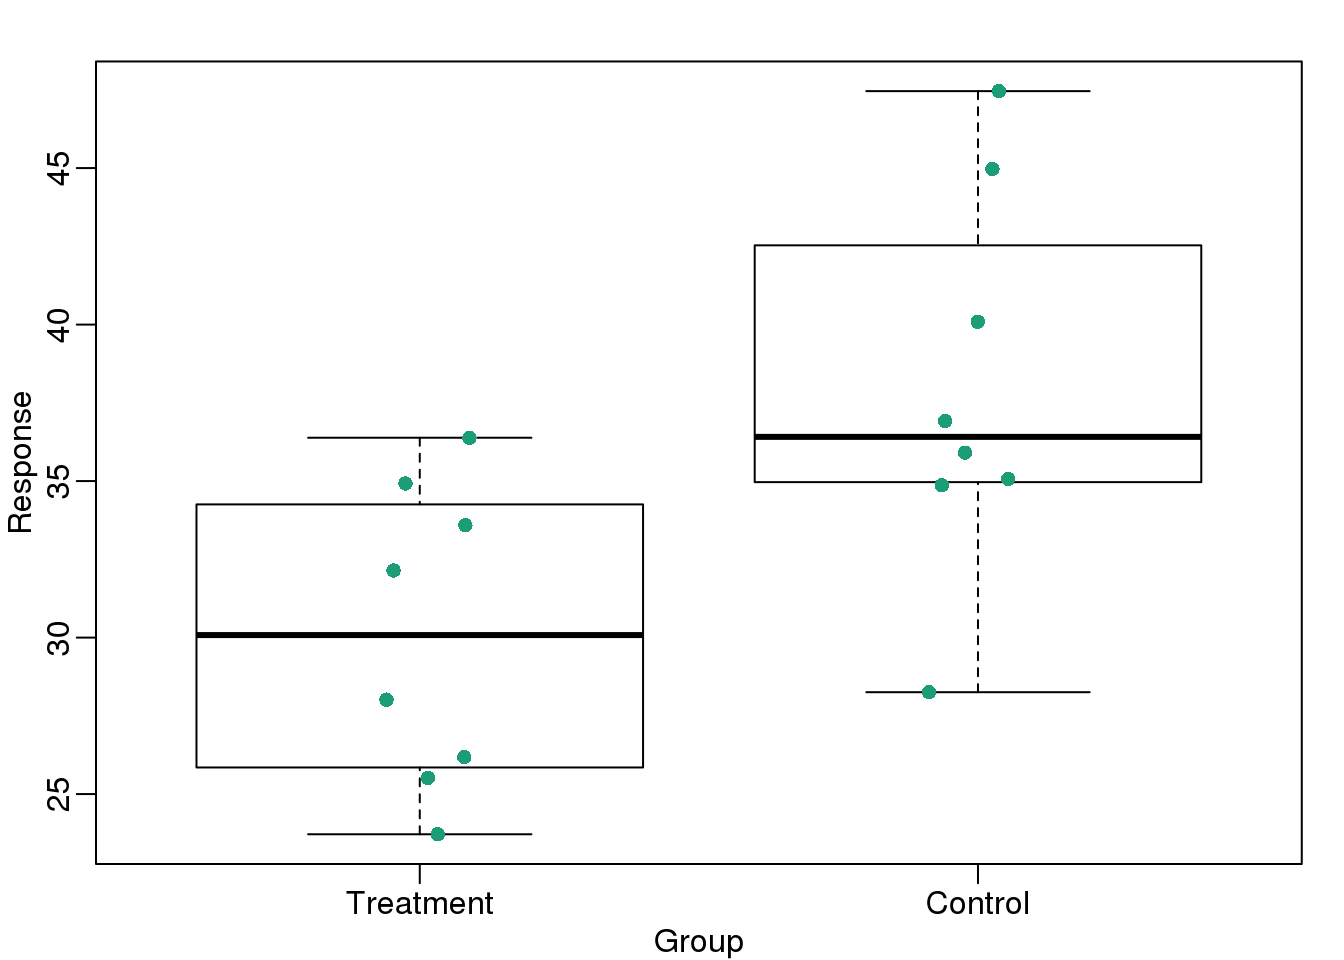 Treatment data and control data shown with a boxplot.